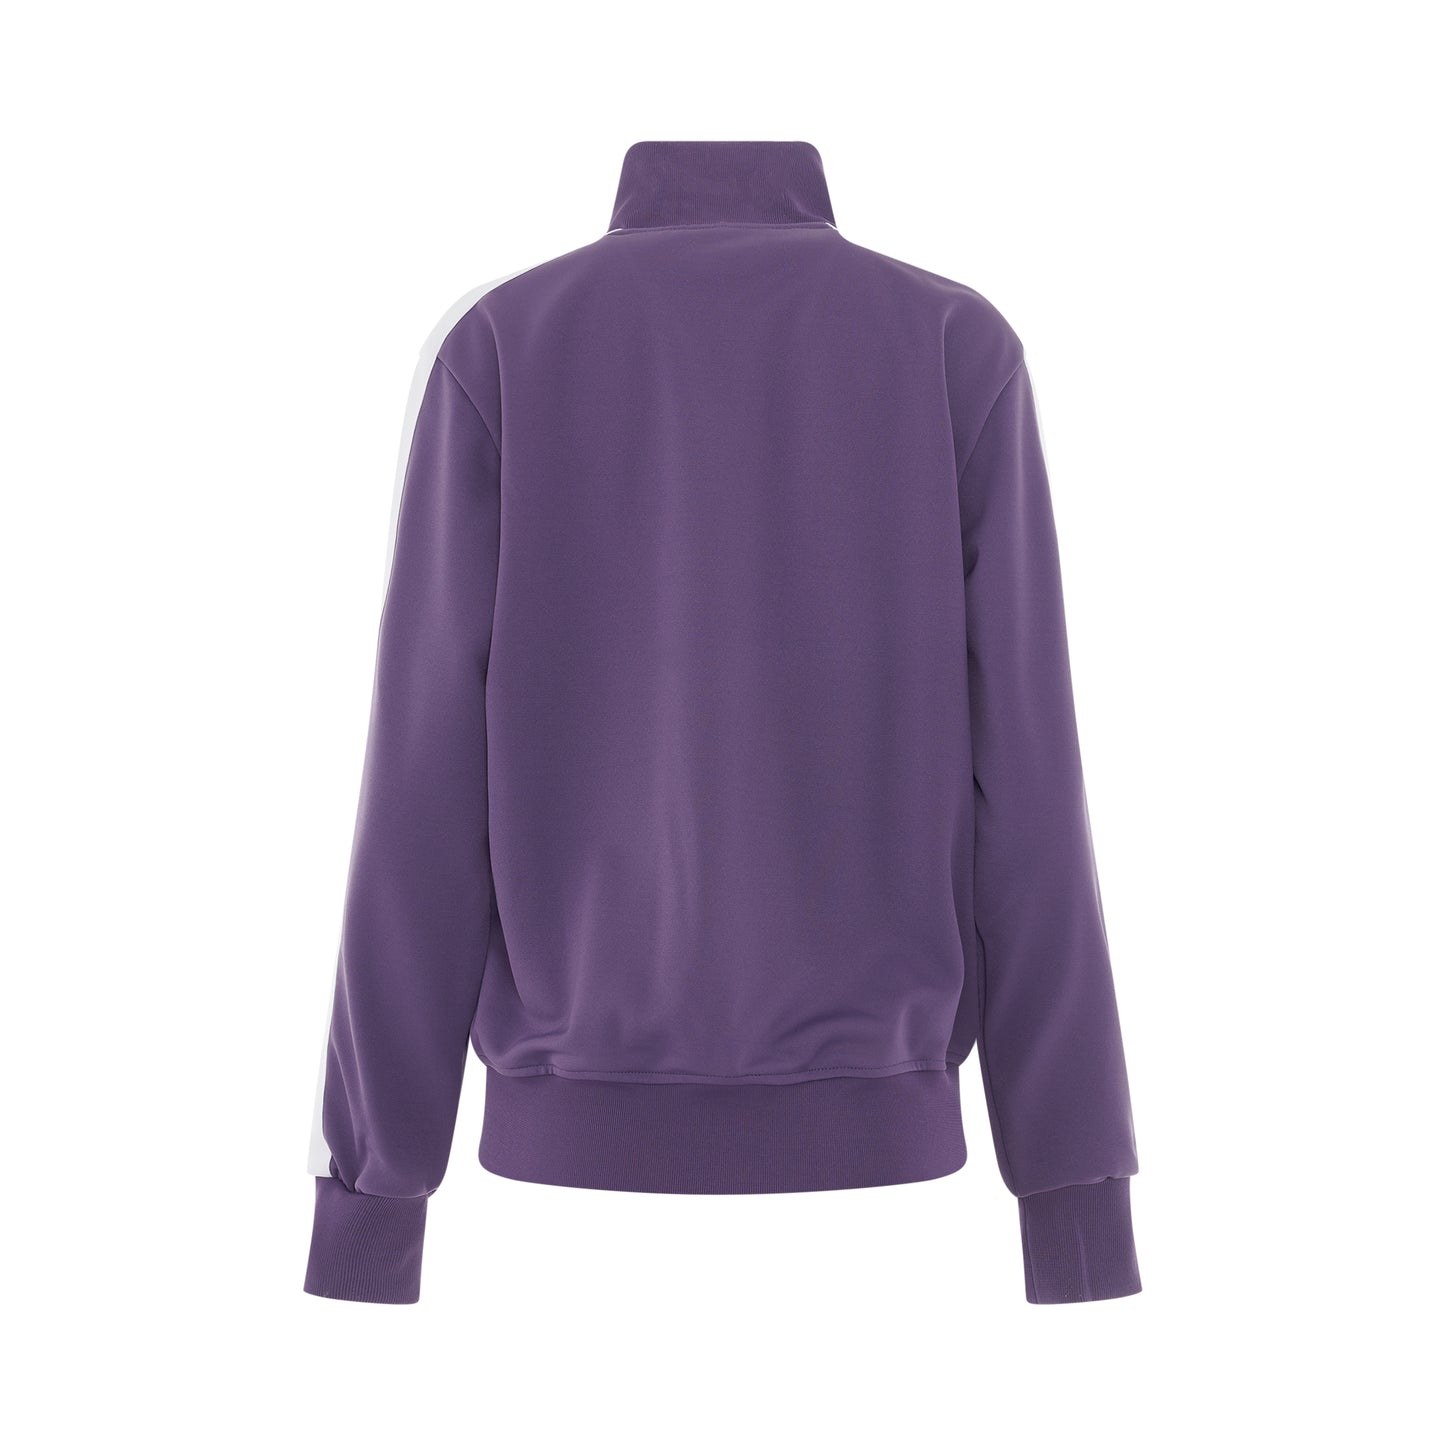 Classic Track Jacket in Purple/Butter